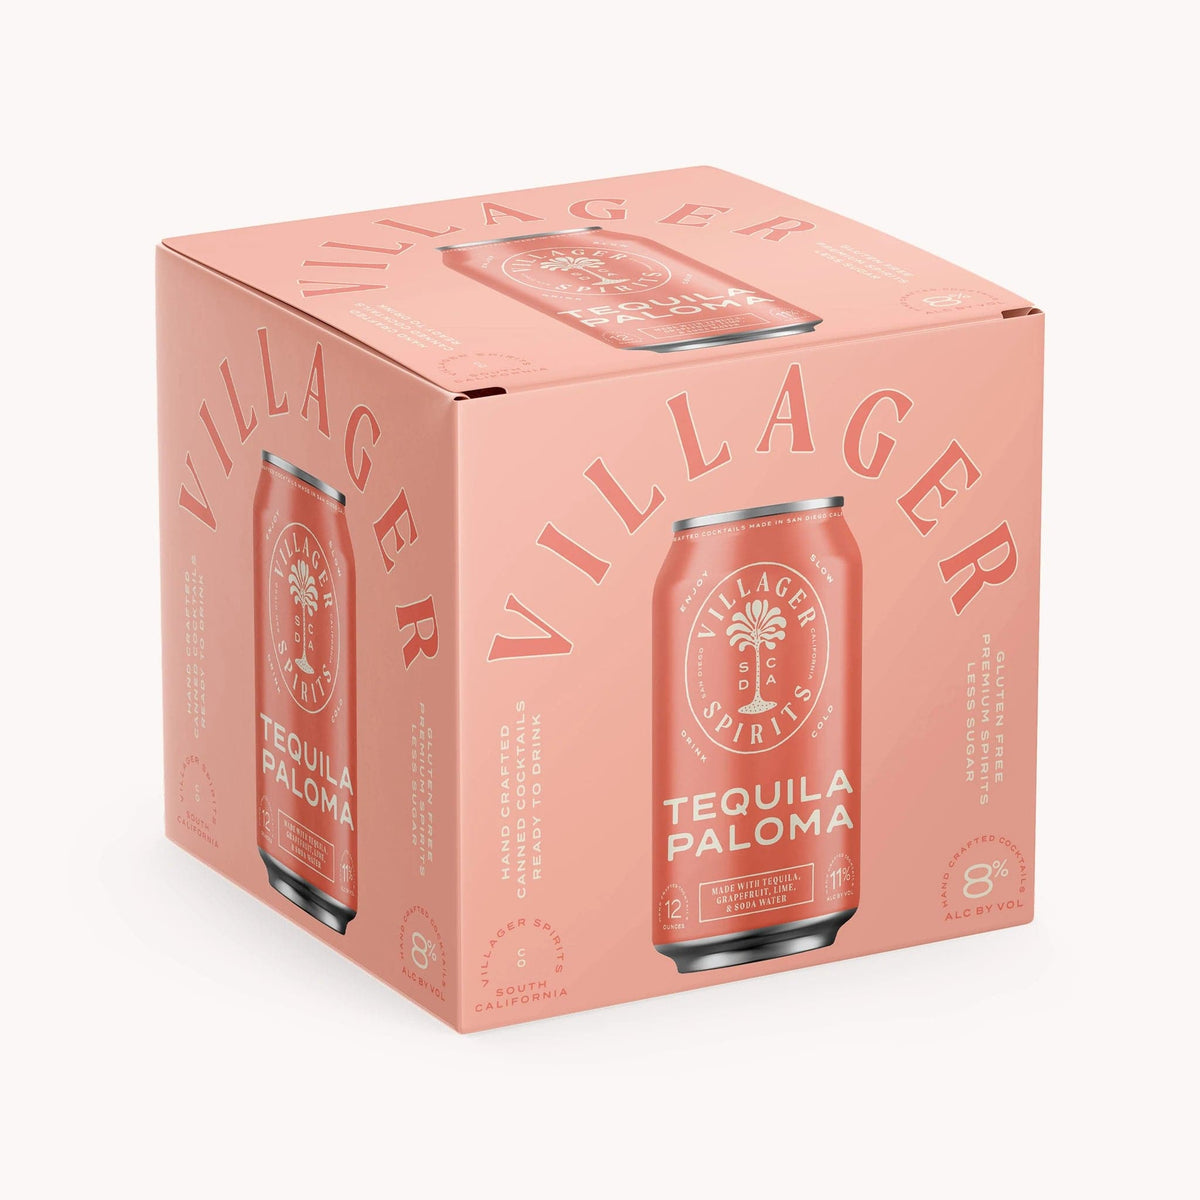 Villager Spirits Tequila Paloma RTD Canned Cocktail 4-Pack - Barbank